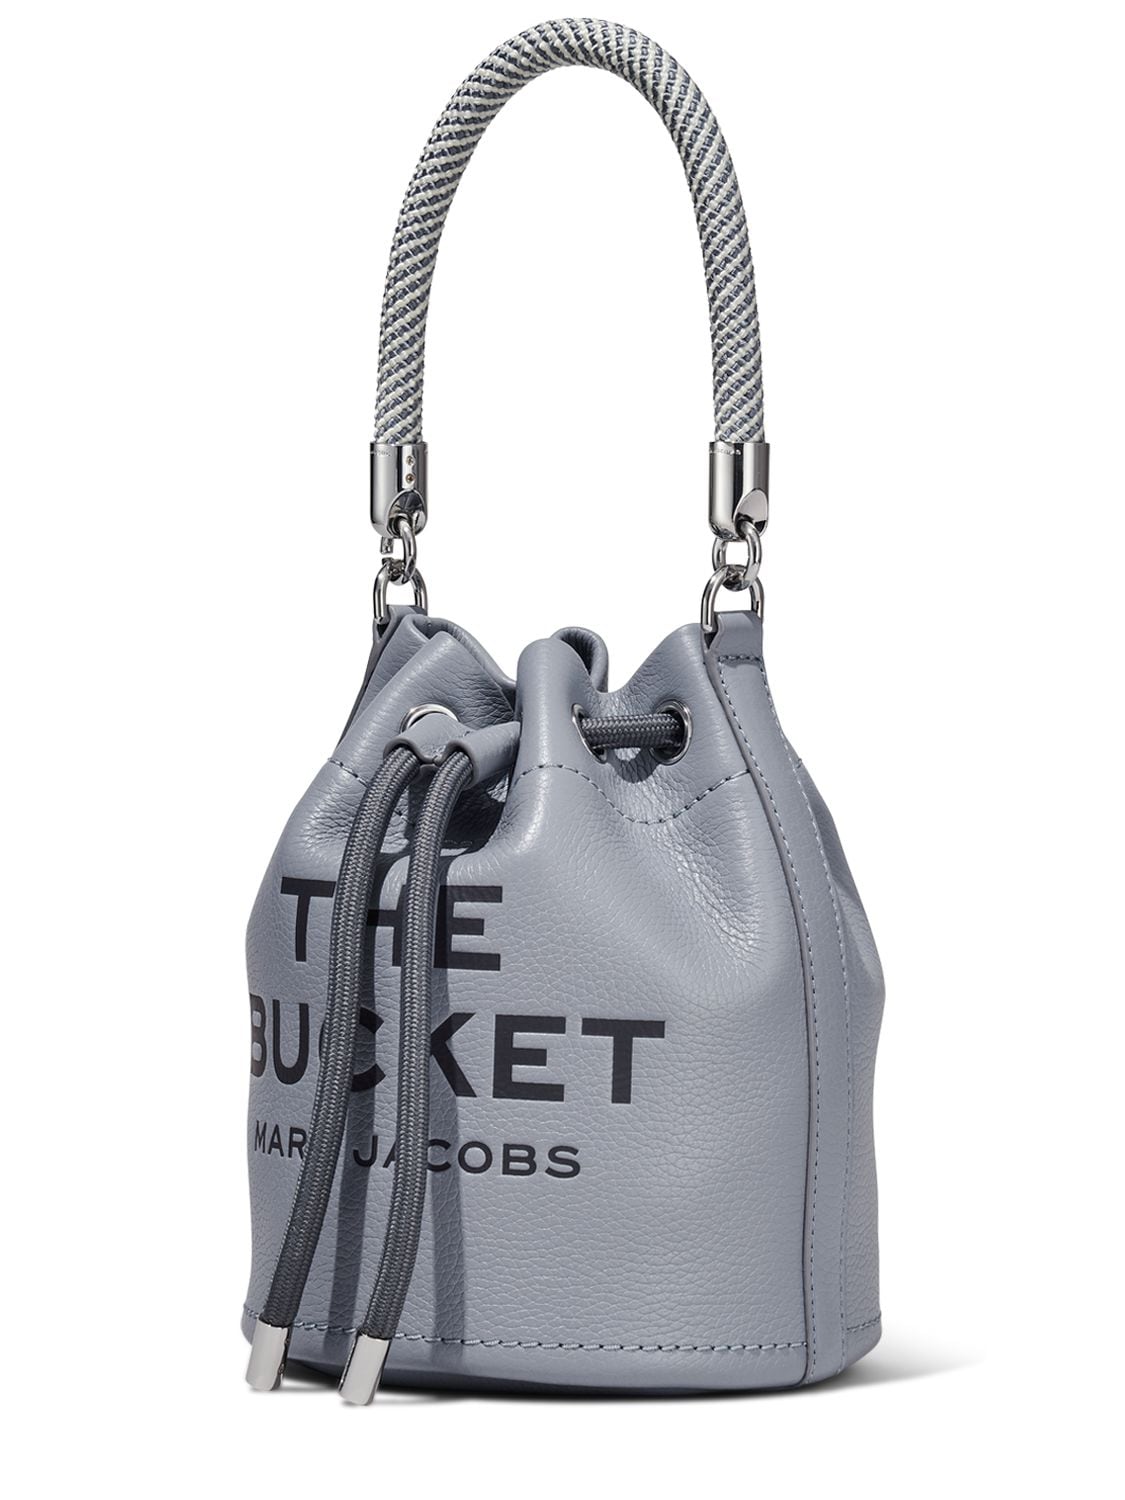 Shop Marc Jacobs (the) The Bucket Leather Bag In Wolf Grey